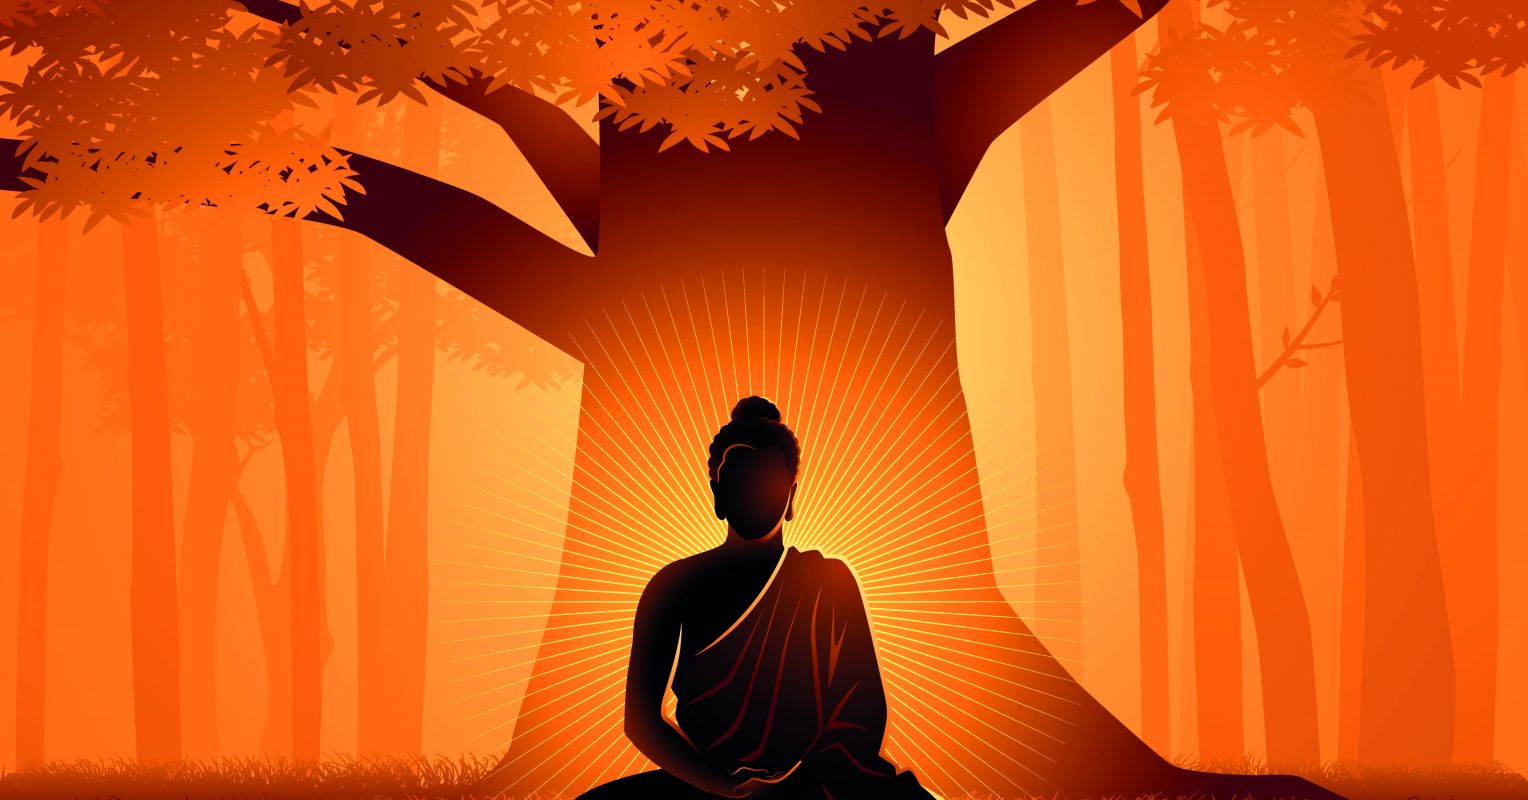 Is Enlightenment Achievable? | Psychology Today